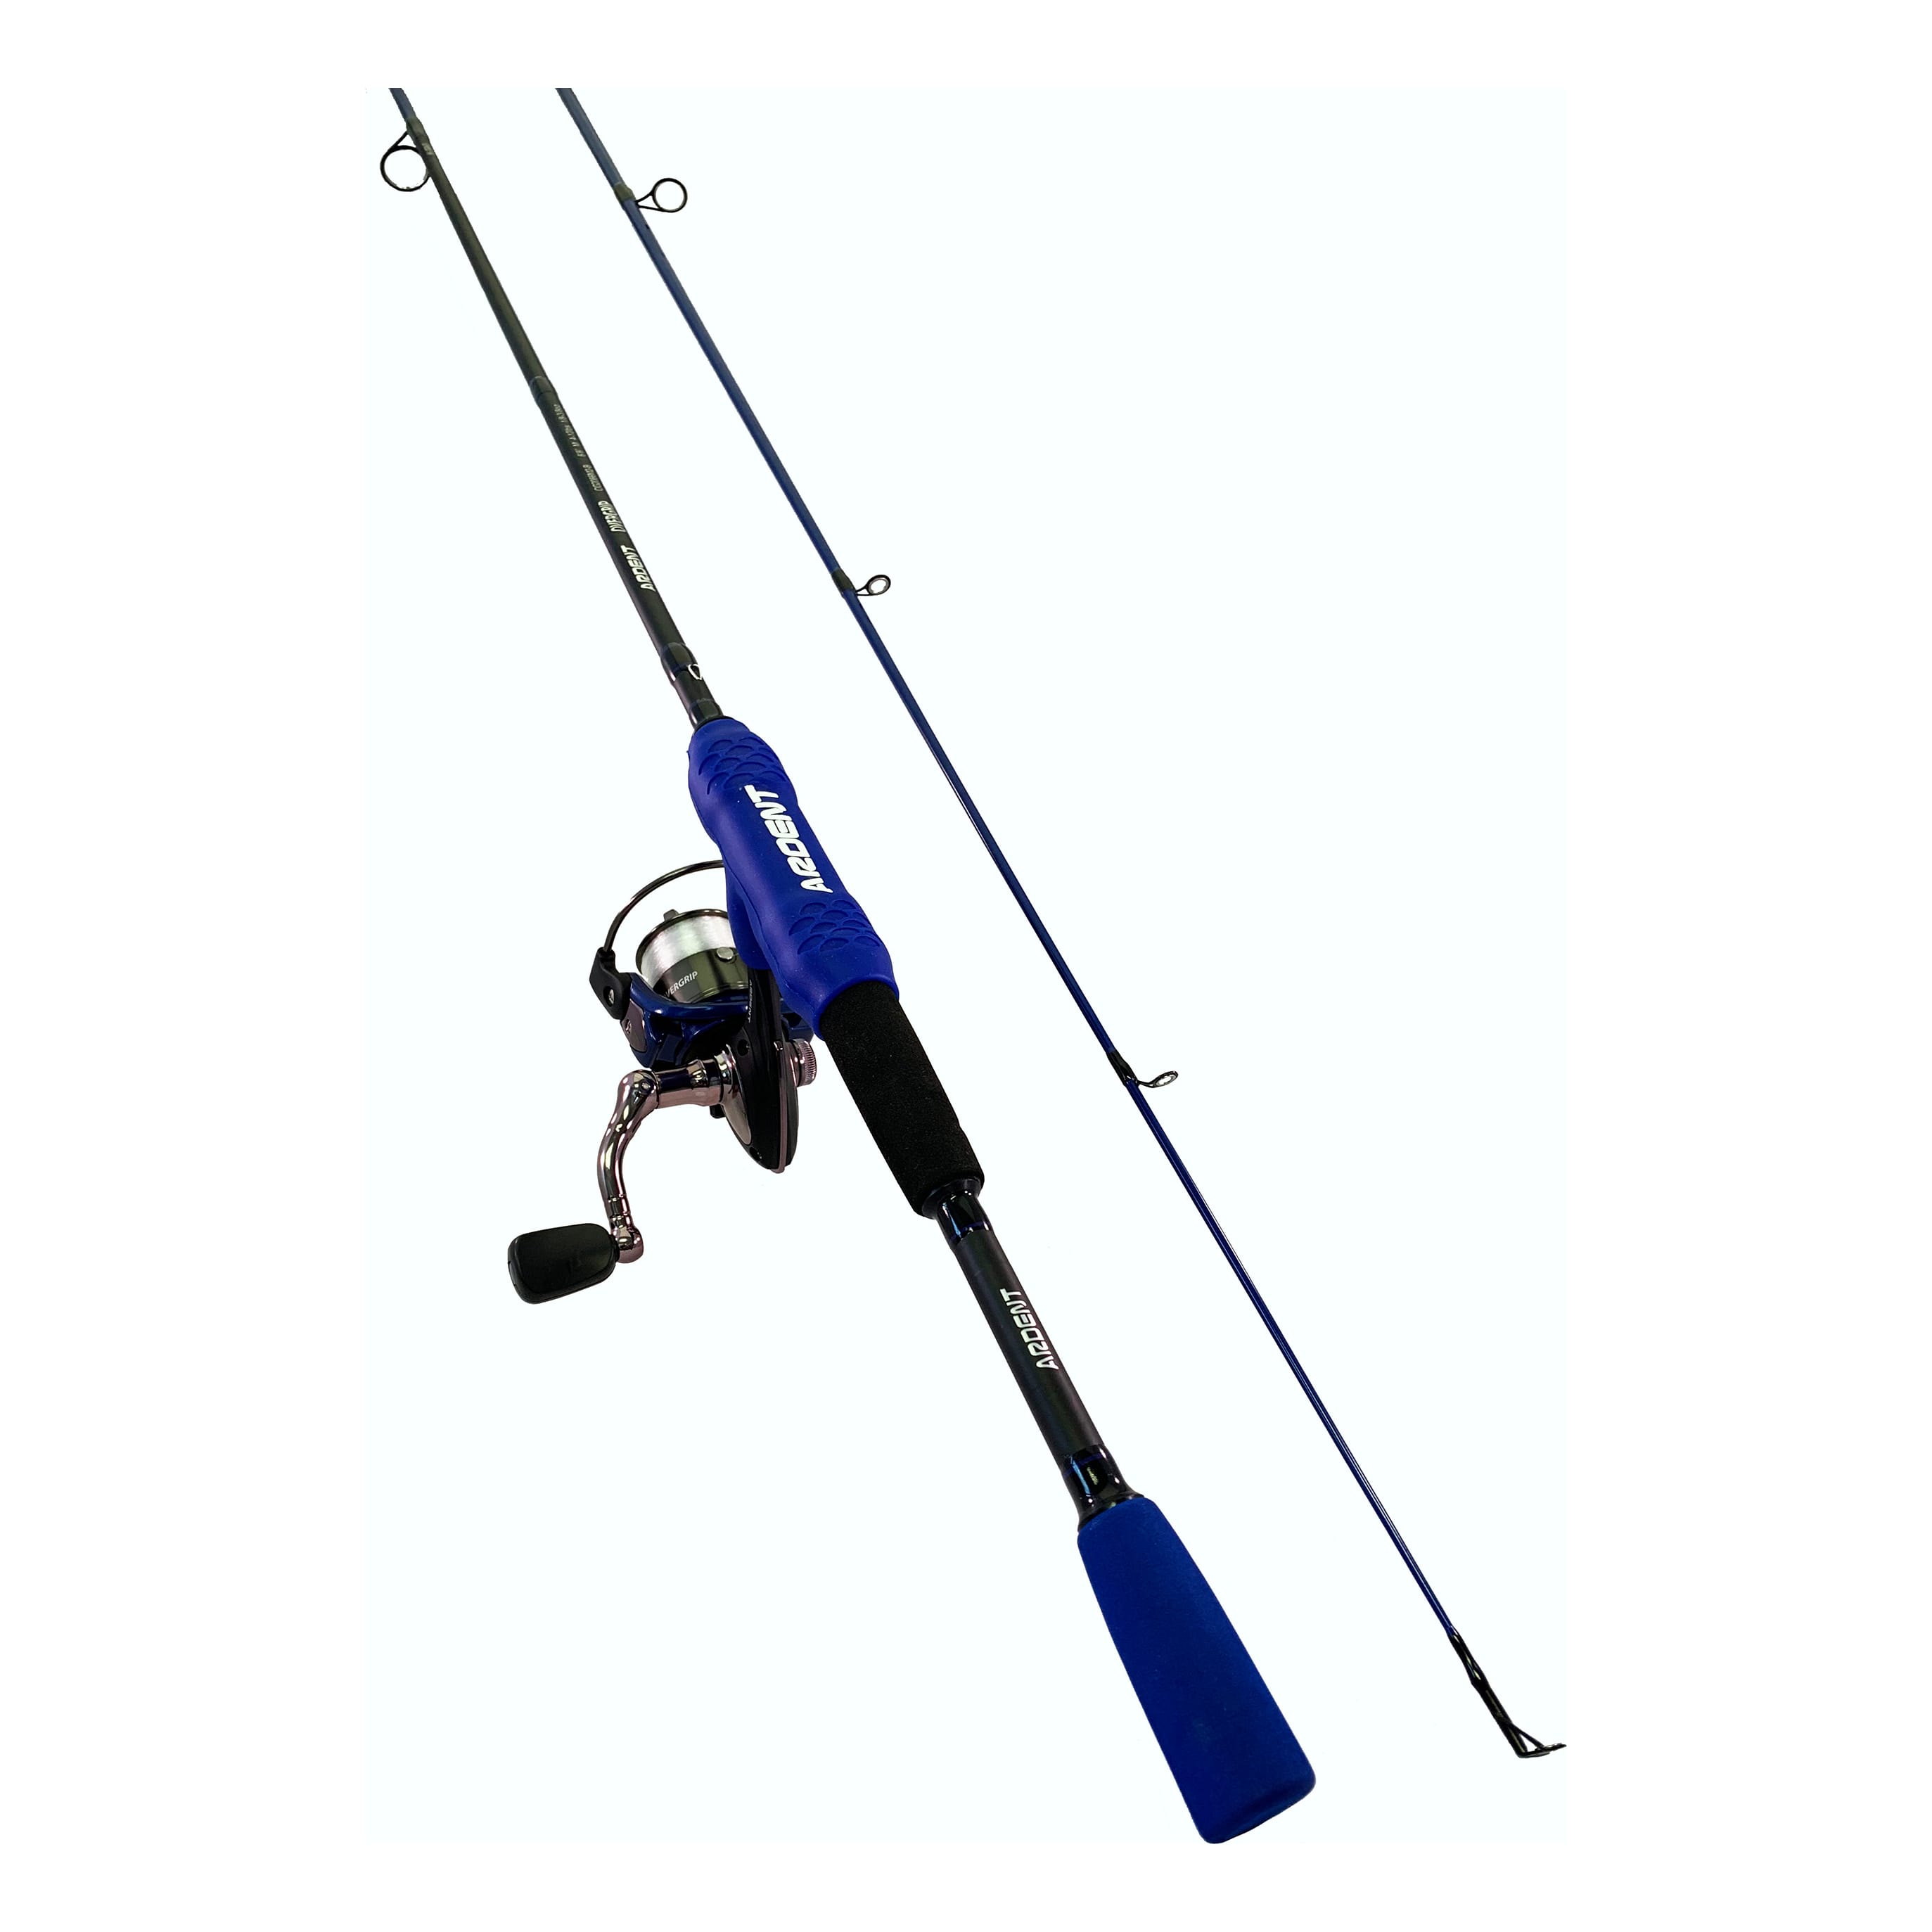 Bass Pro Shops Stampede Rear Drag Reel and Rod Spinning Combo - SP3066MR-2